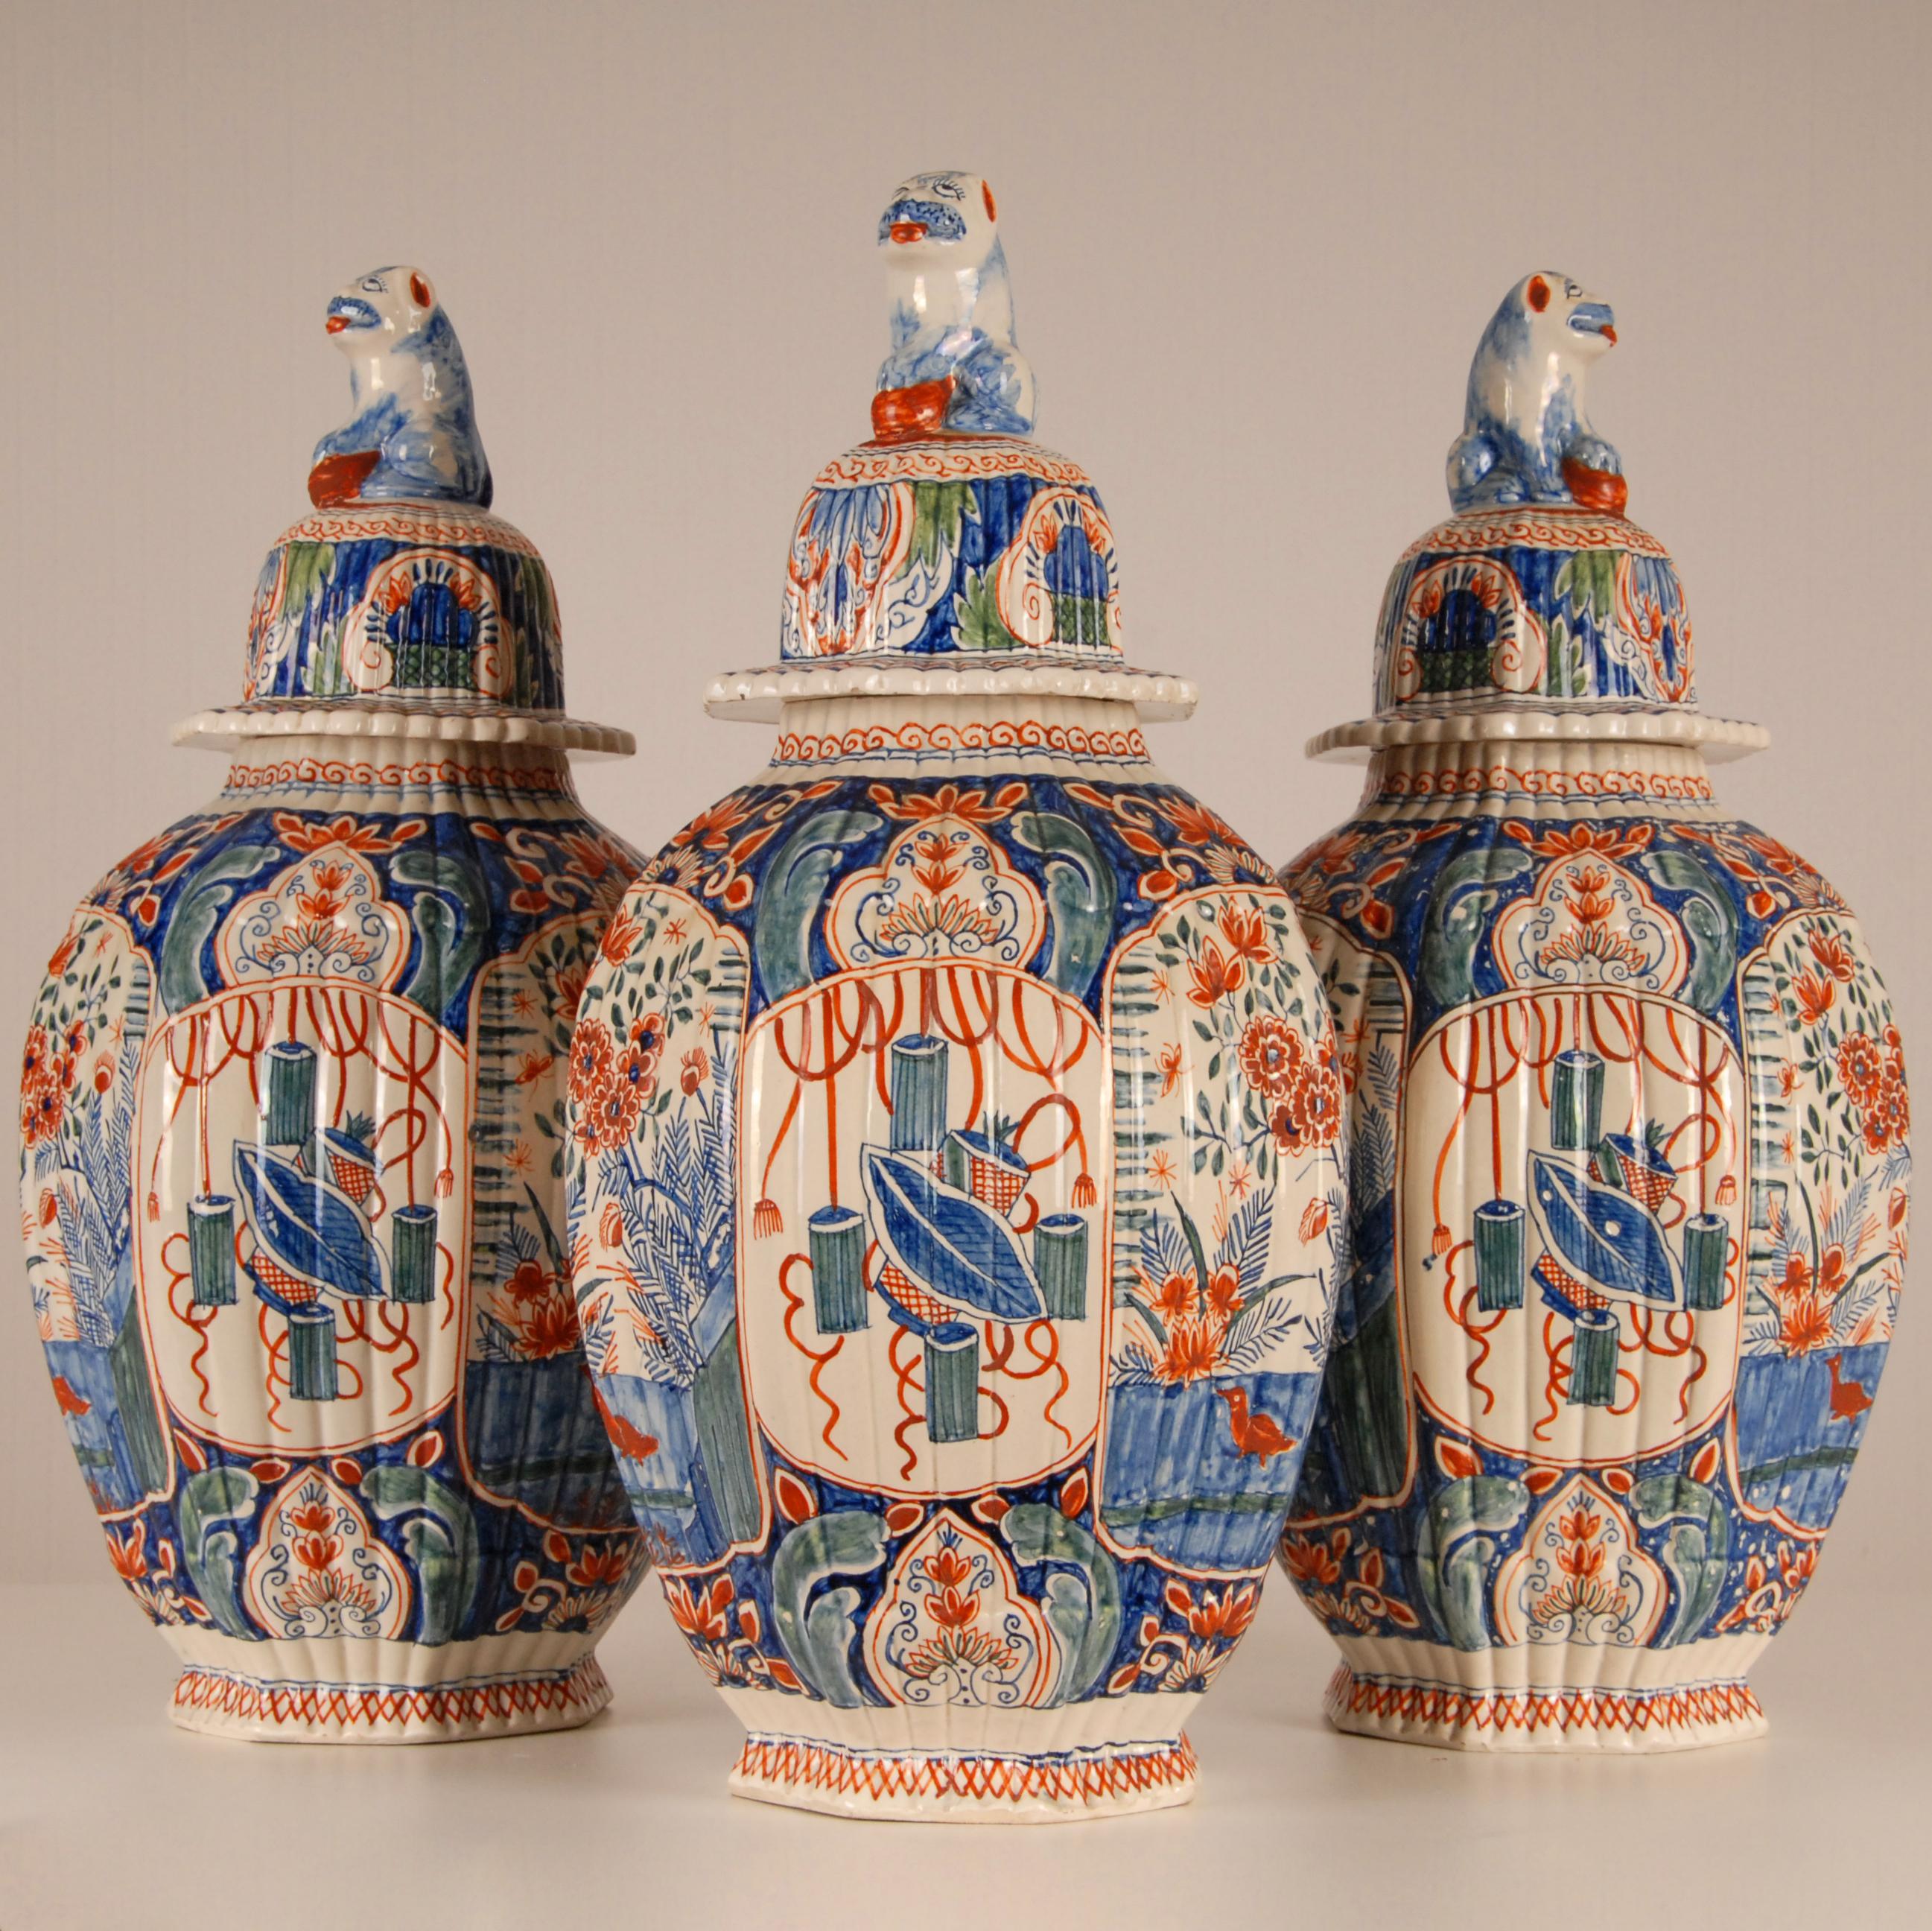 Edme Samson Dutch Delftware.
A garniture of three antique polychrome Reeded Ovoid Vases and Covers.
A garniture of vases in the precious and wanted Cashmere palette
Each decorated on the ovoid body with four elongated panels painted in blue,